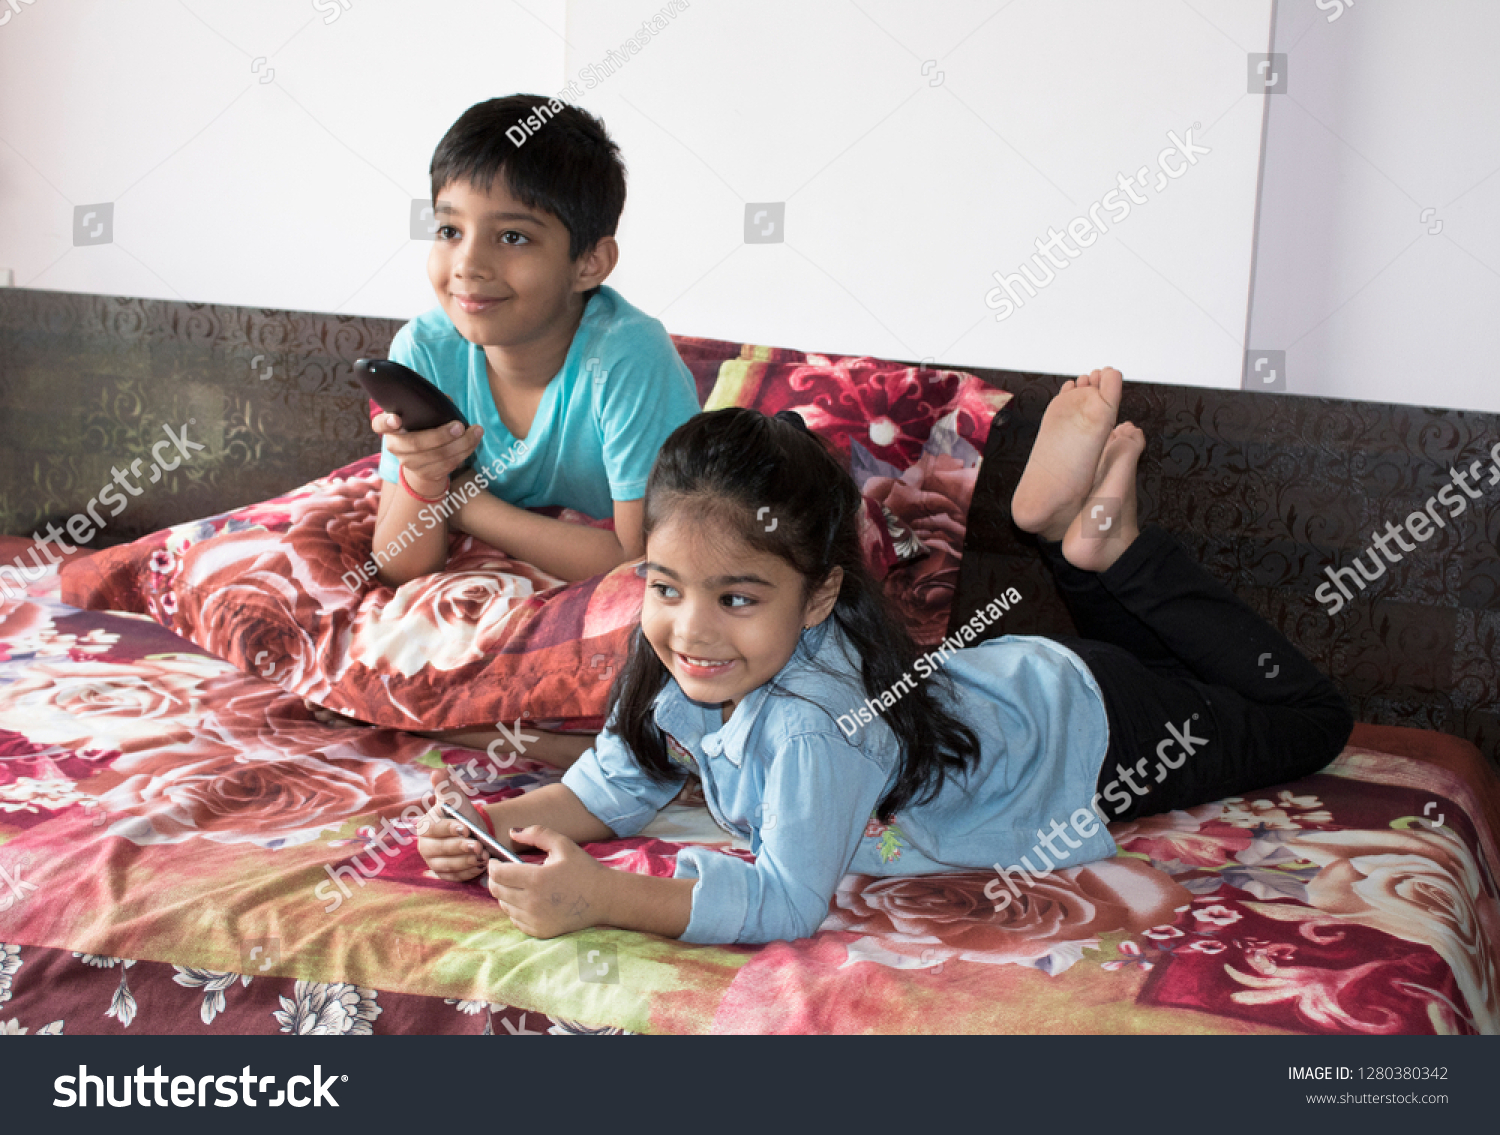 Girl using mobile phone while brother is watching tv on bed #1280380342